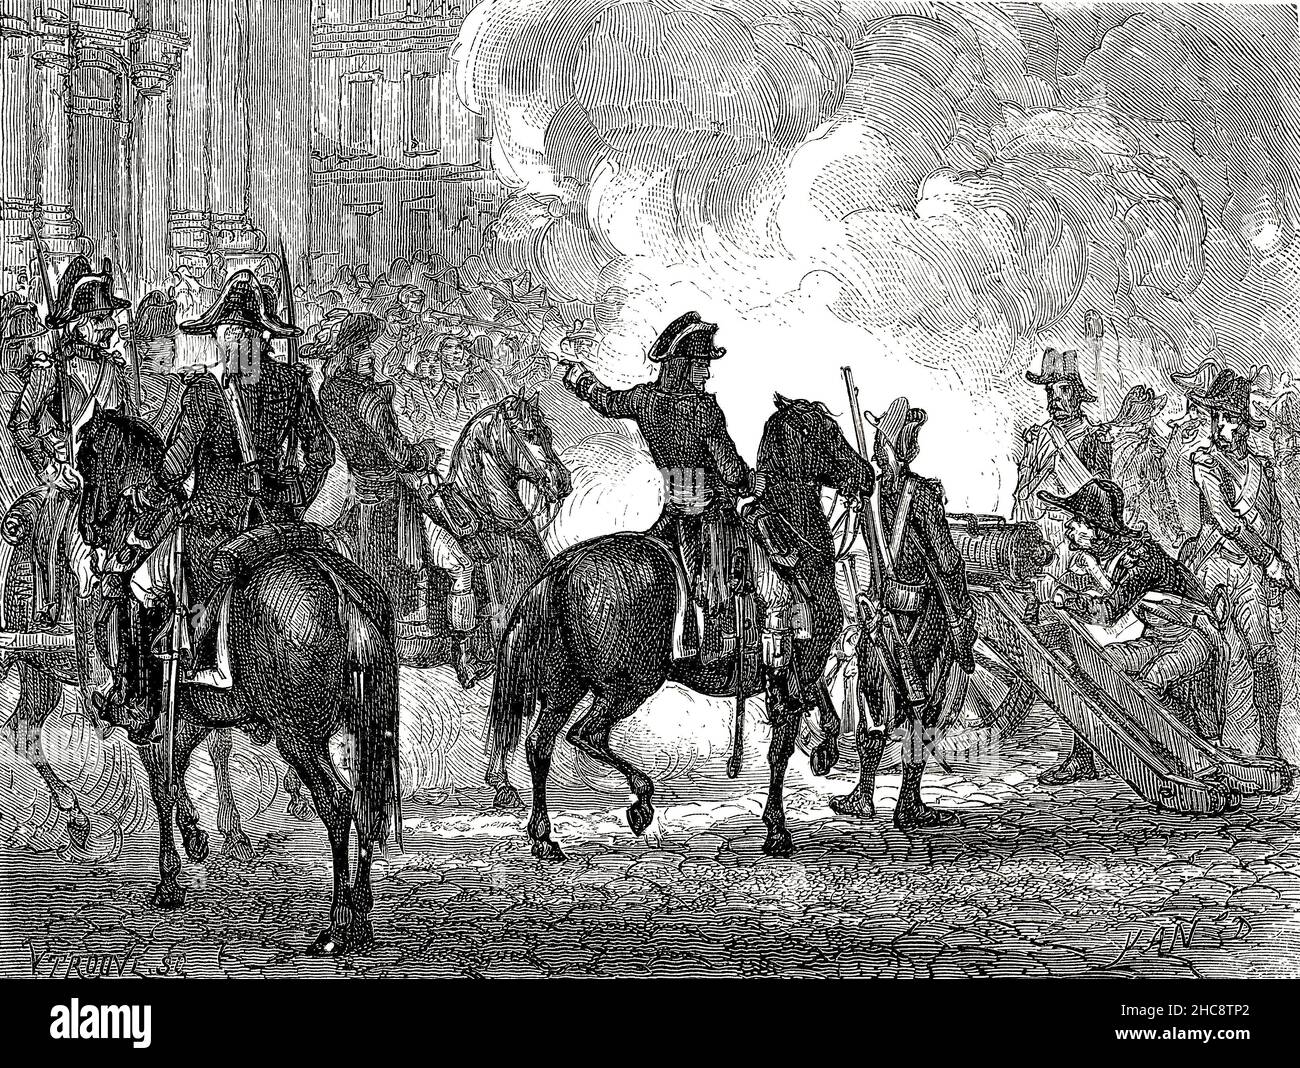 The suppression of the pro Royalist uprising on the streets of Paris on the 5th October 1795 (the 13th of Vendemiare in the Revolutionary calendar). A young general Napoleon Bonaparte ordered the troopsto fire grapeshot onto the crowds on the steps of teh church of Saint Roch on rue St Honoré, Paris. Stock Photo